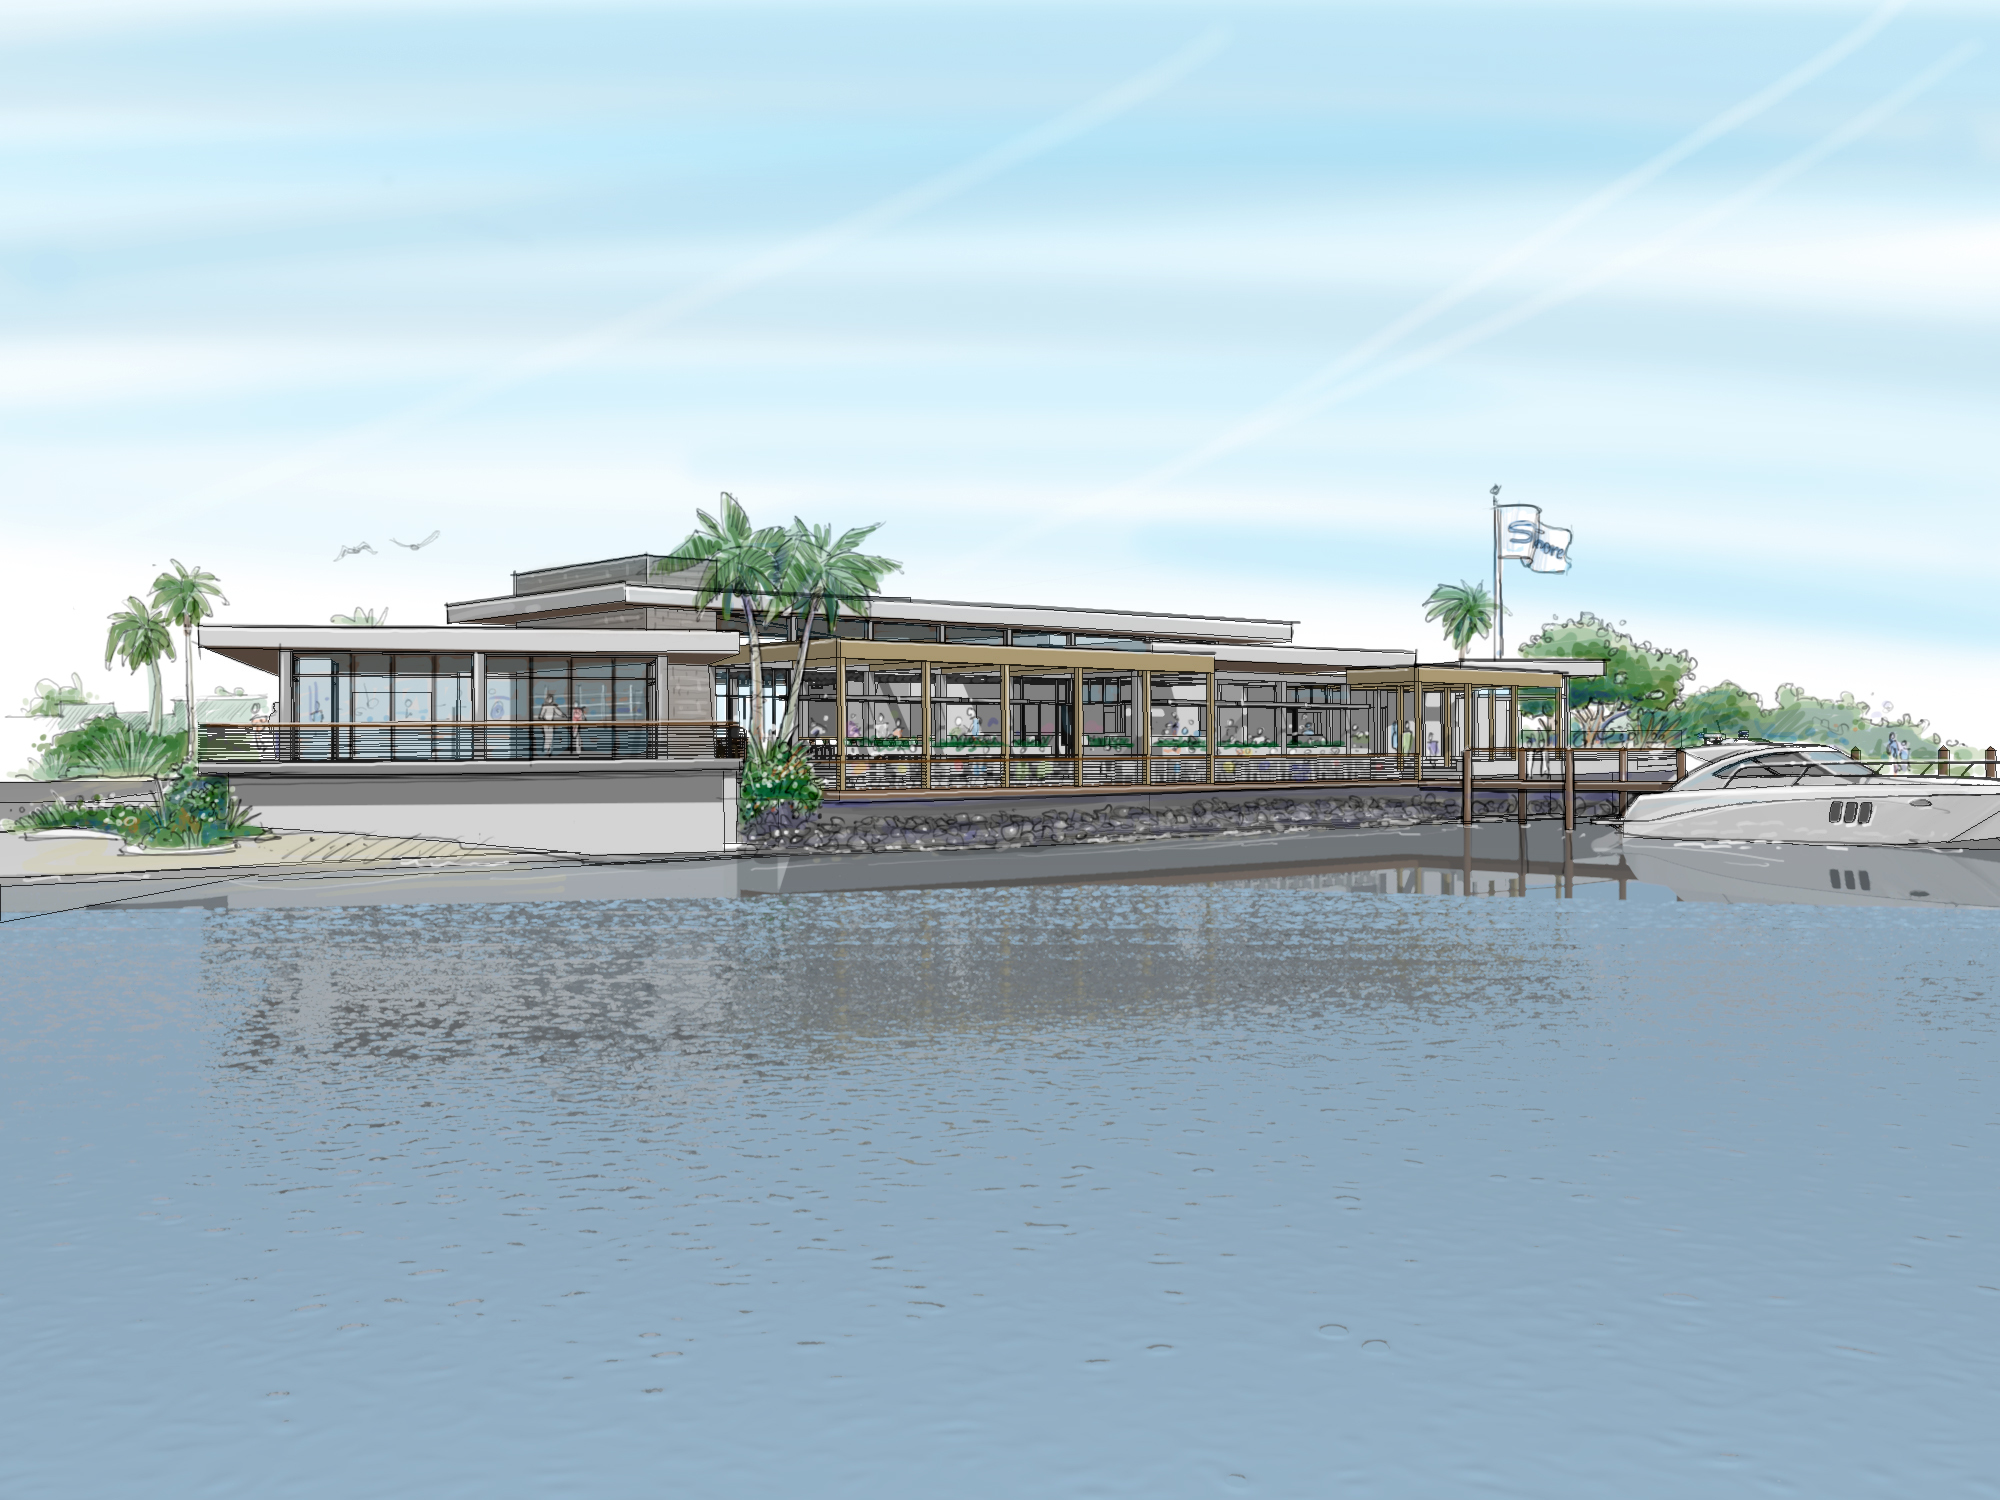 Shore on Longboat Key co-owner Tom Leonard said he hopes to have the final permits for the new restaurant by the end of the month.